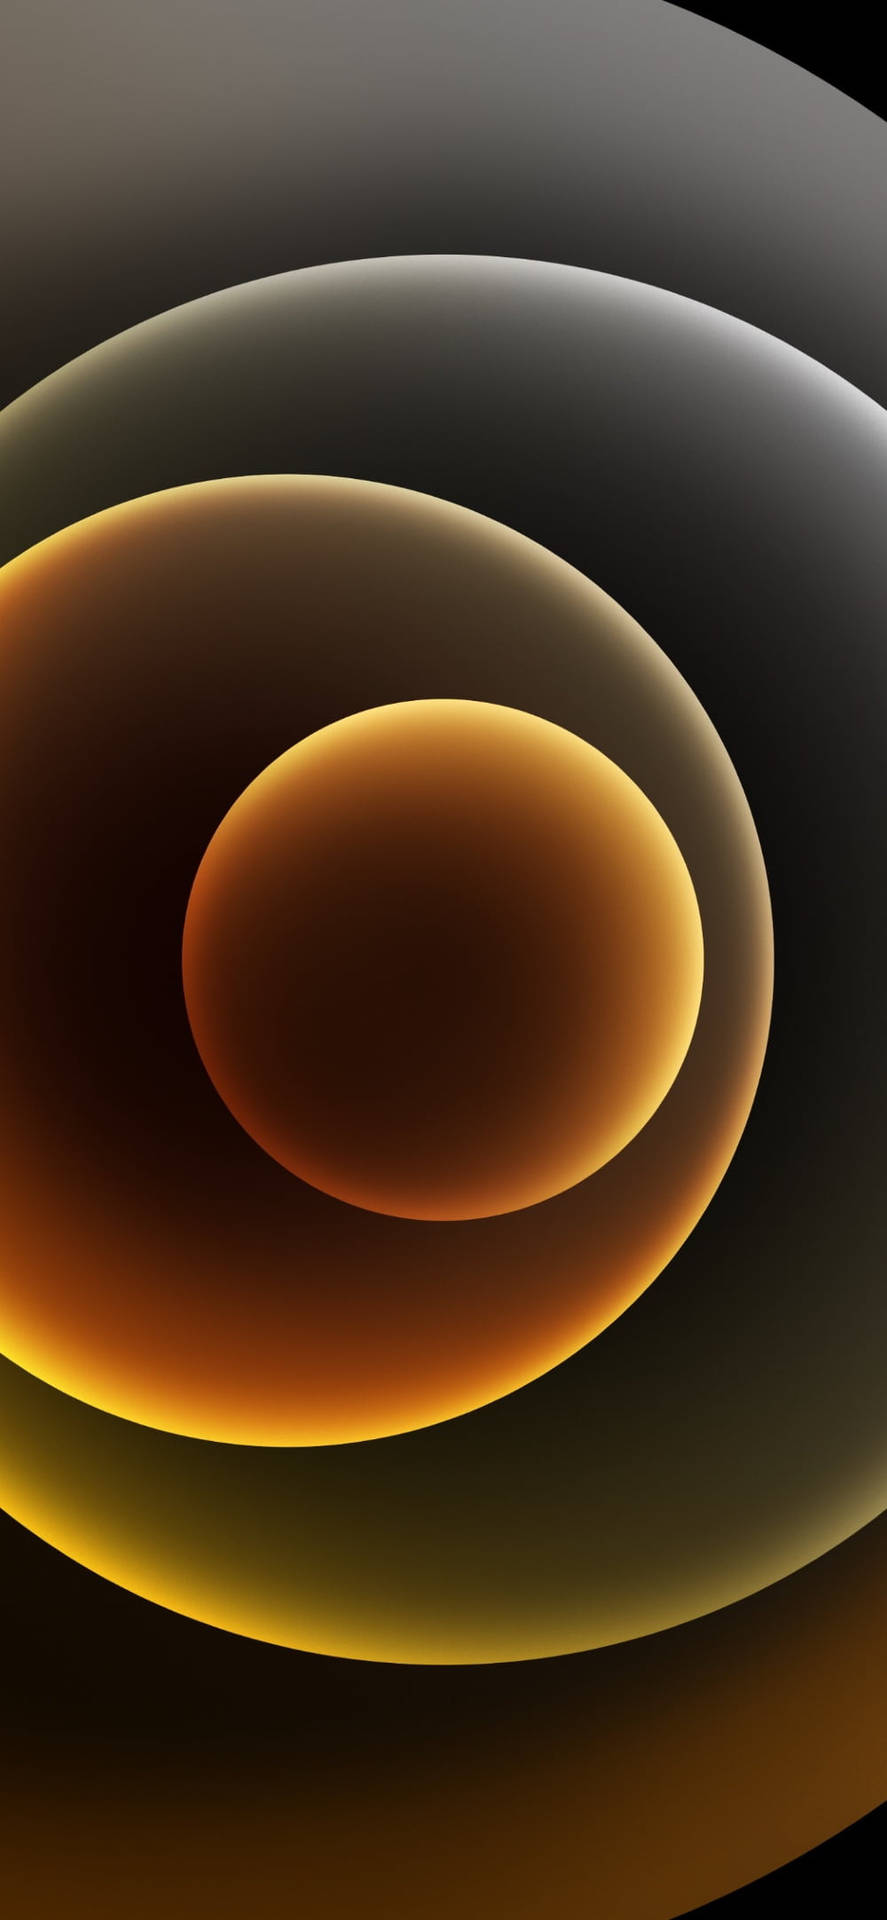 Iphone 12 Pro Max Gold And Grey Circles Background